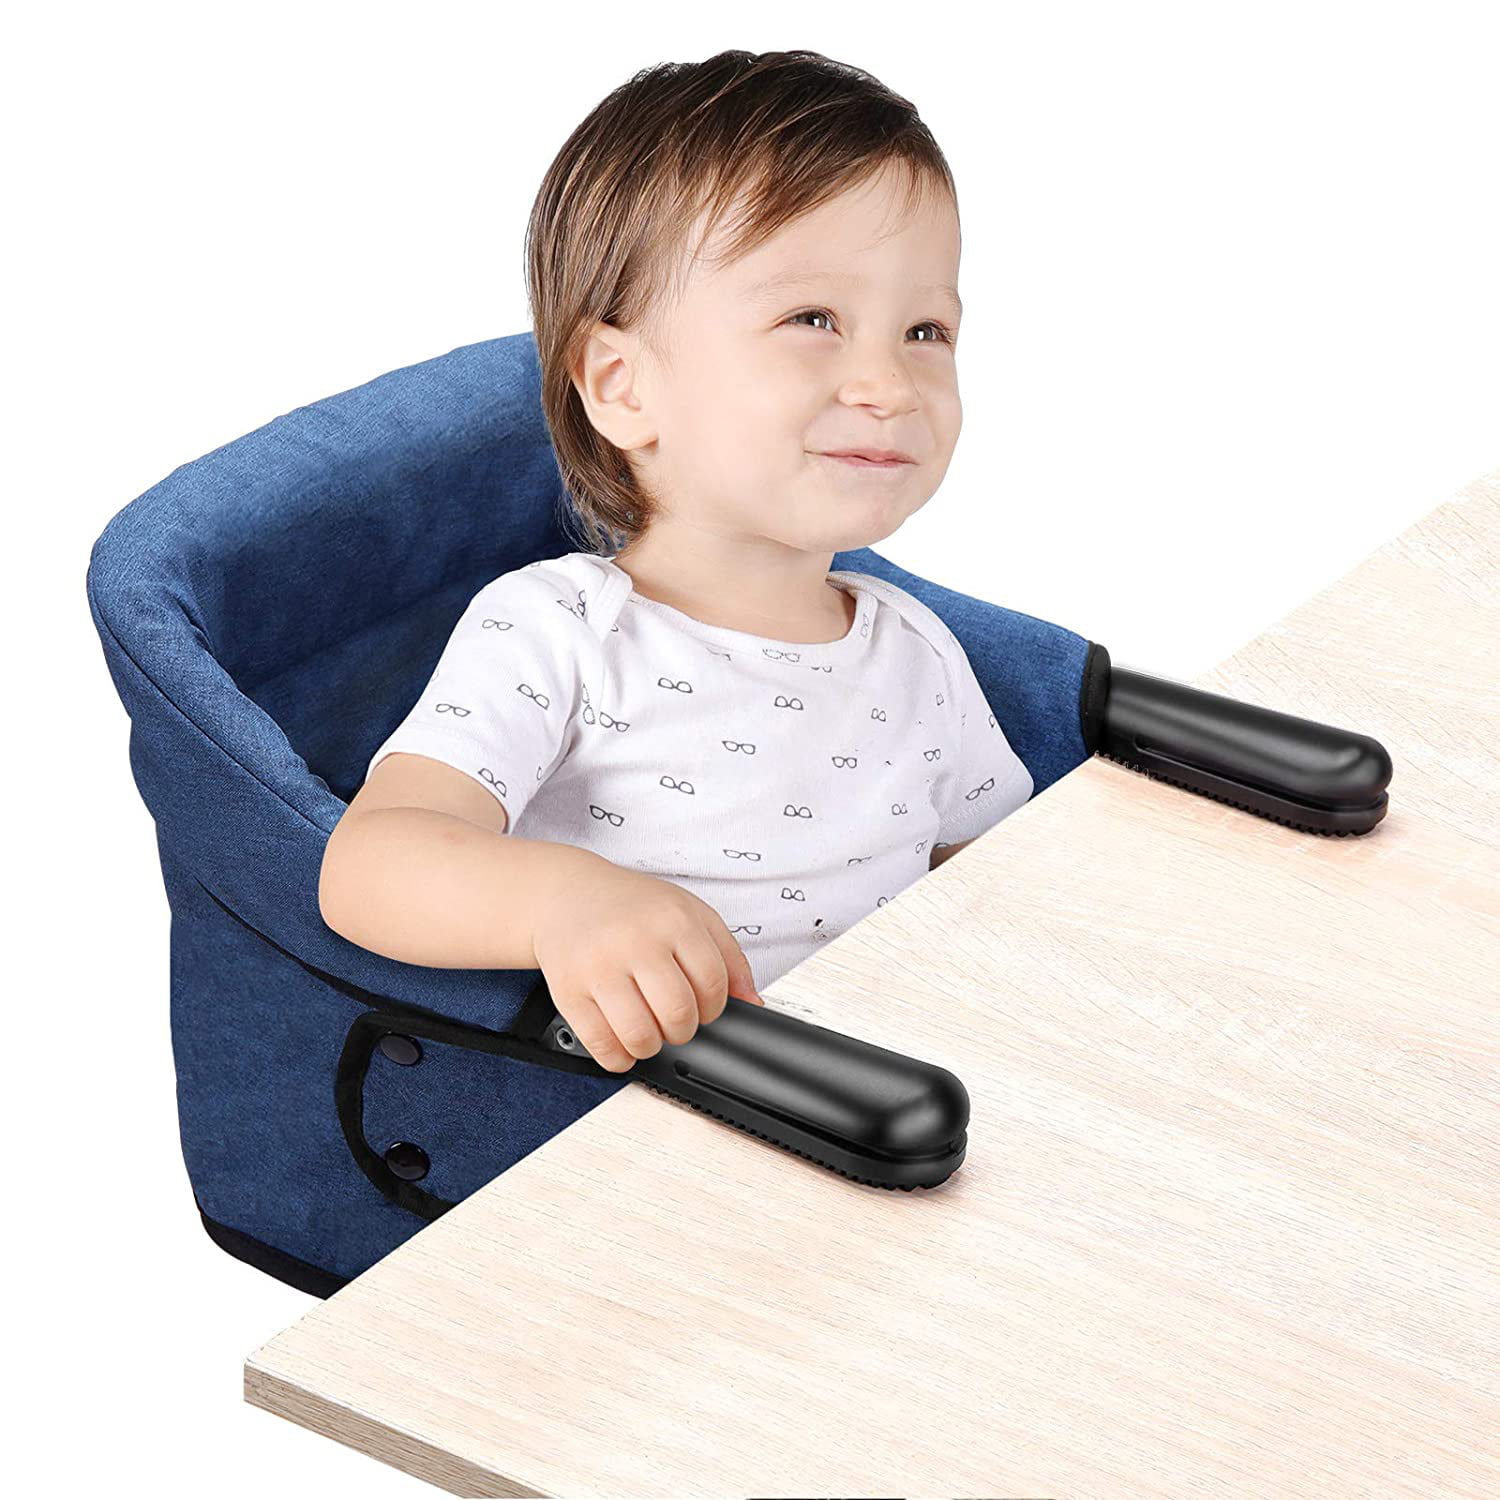 Hook On Chair Attach to Fast Table Chair Fold-Flat Storage Portable Feeding Seat Navy Blue High Load Design Clip on High Chair 